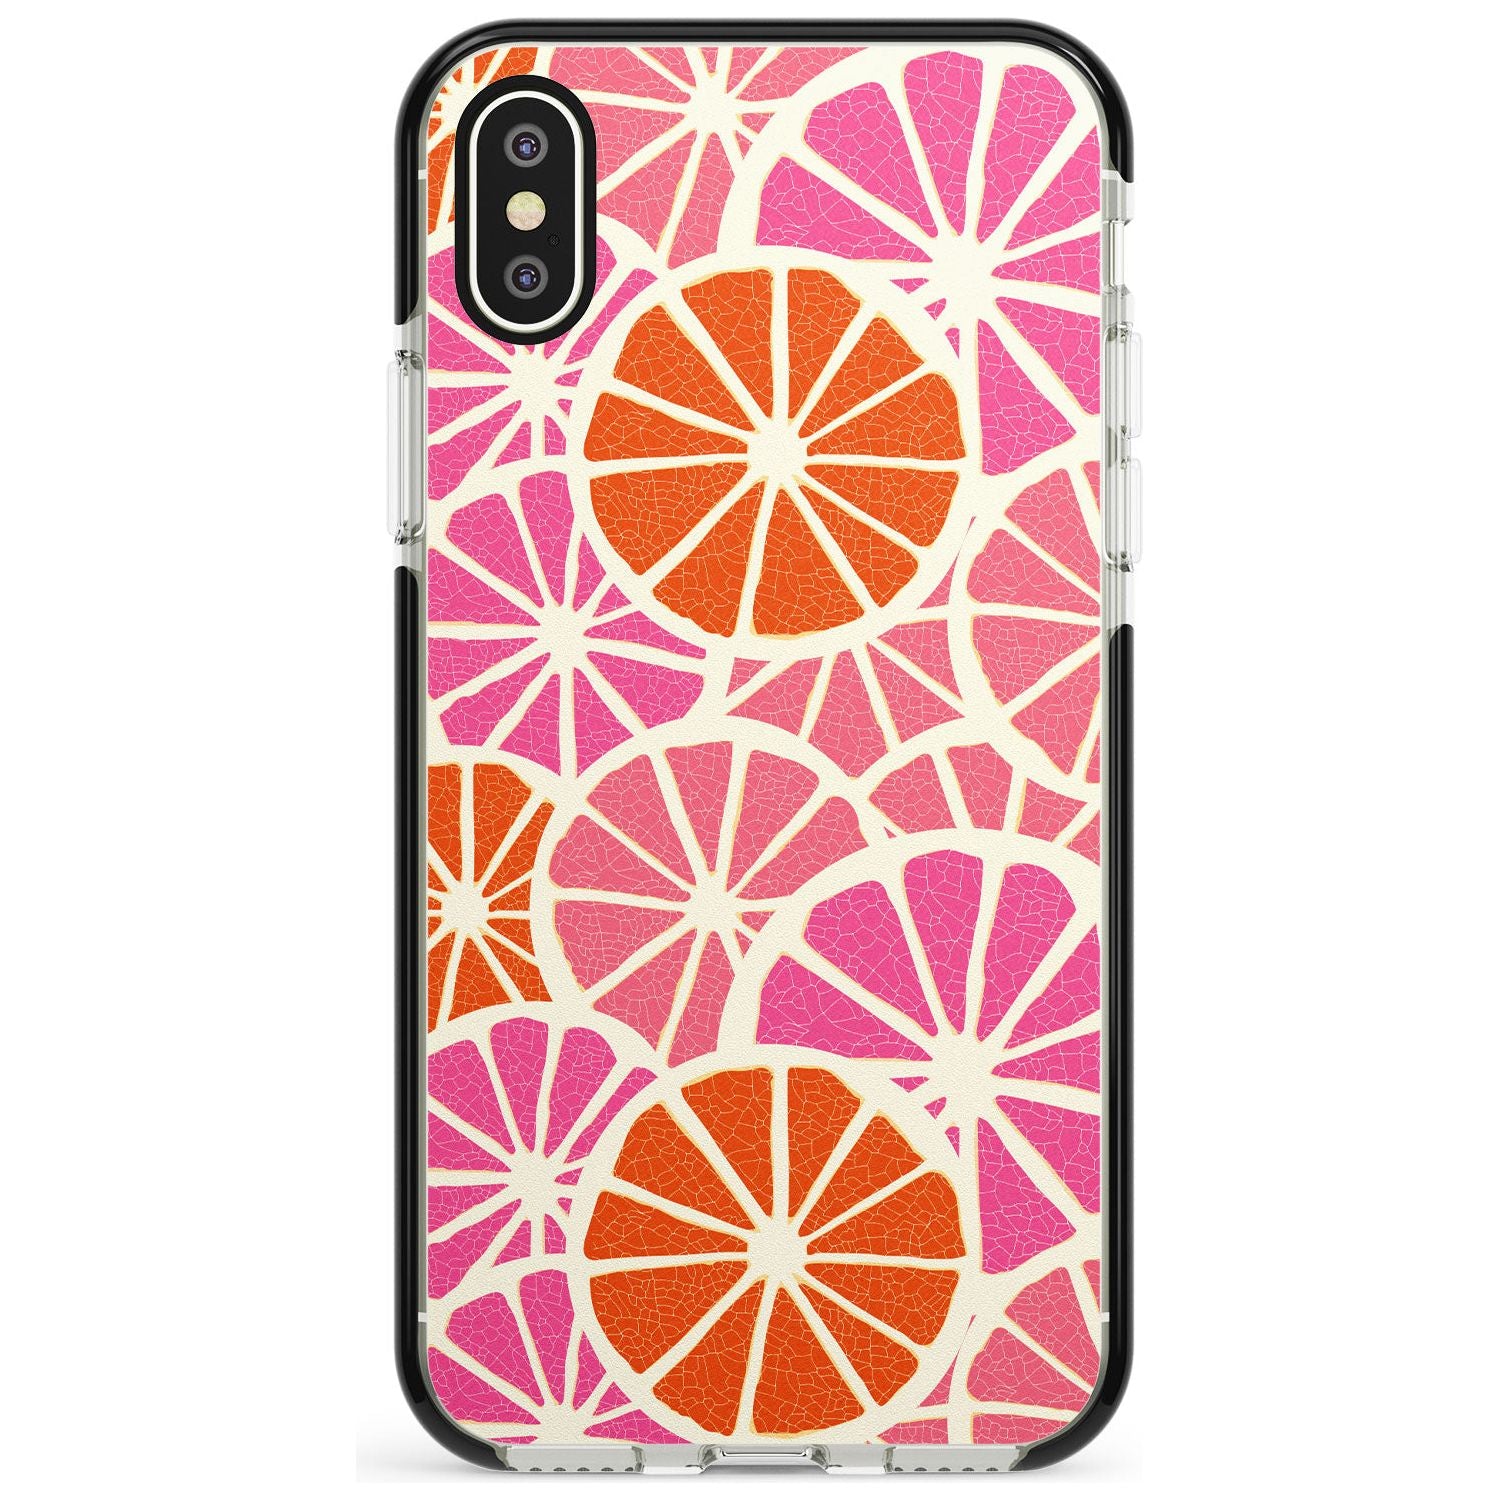 Citrus Slices Pink Fade Impact Phone Case for iPhone X XS Max XR